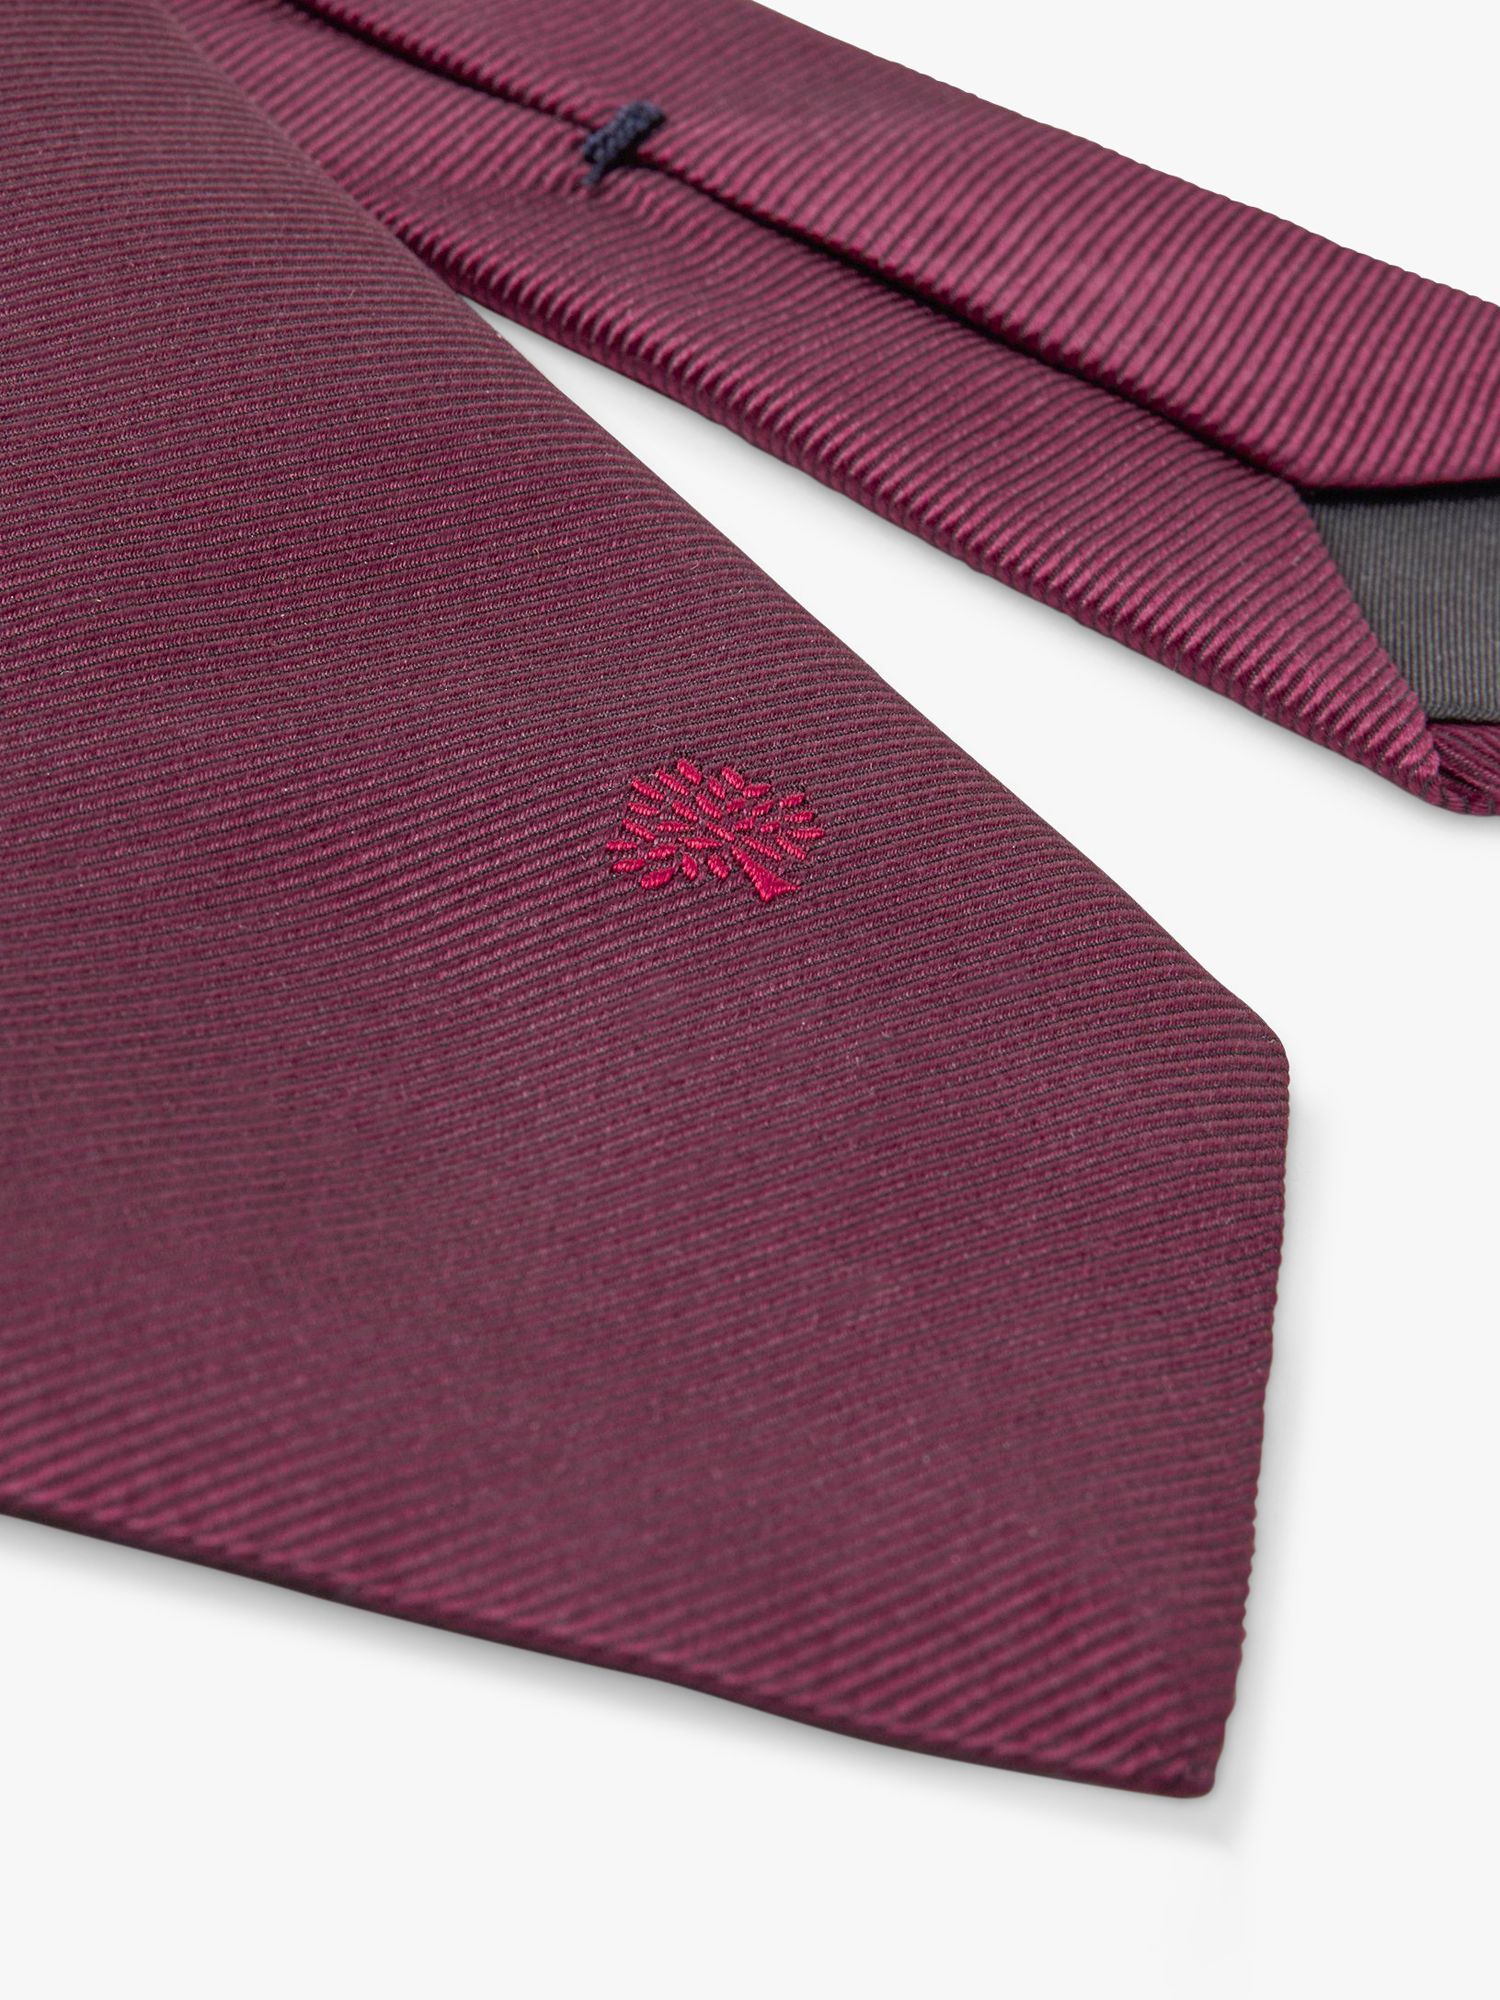 Mulberry Embroidered Mulberry Tree Textured Silk Tie, Black Cherry